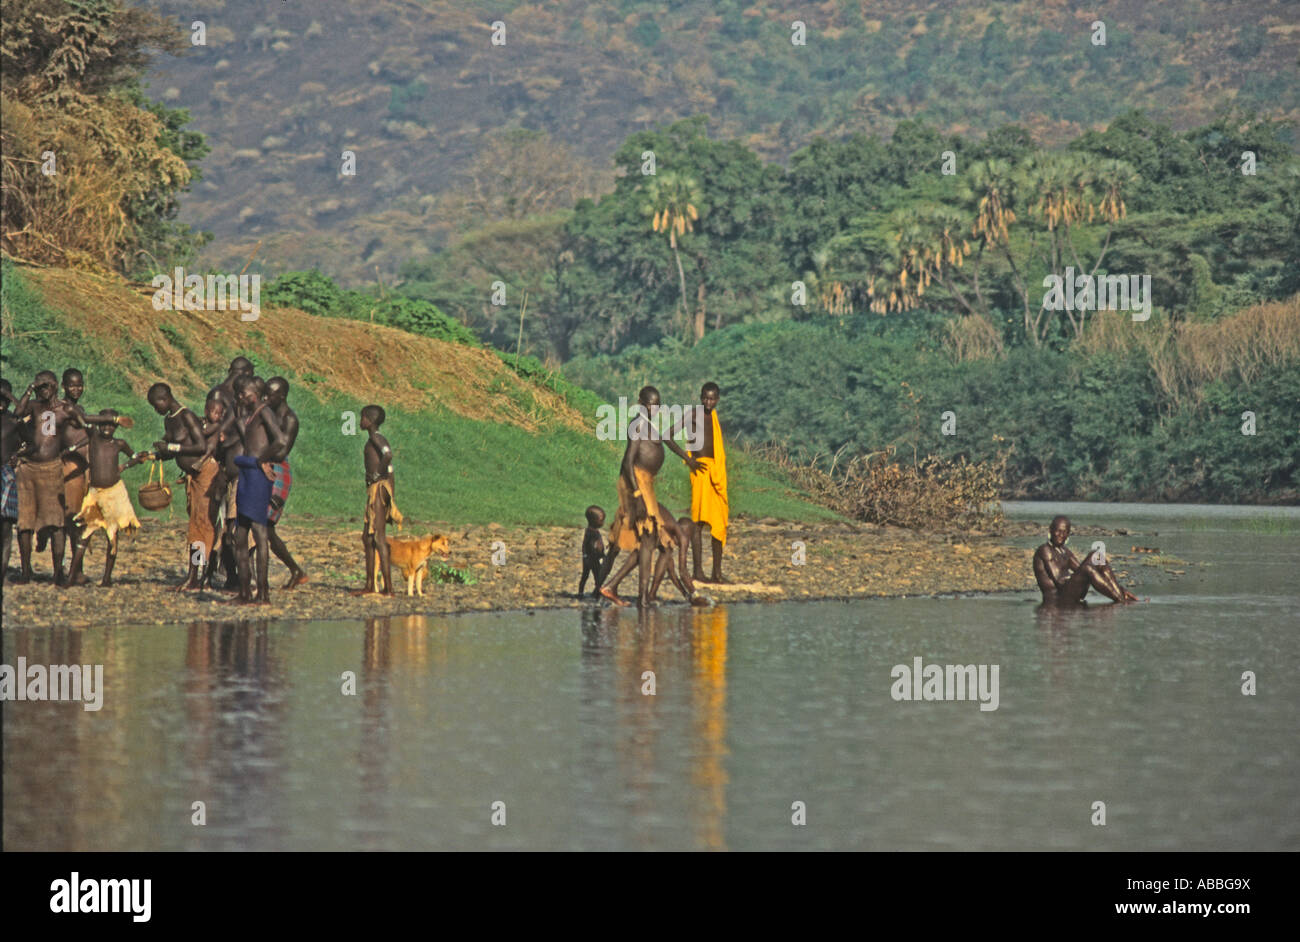 Bodi tribal group on the banks of the Lower Omo River Ethiopia Stock Photo